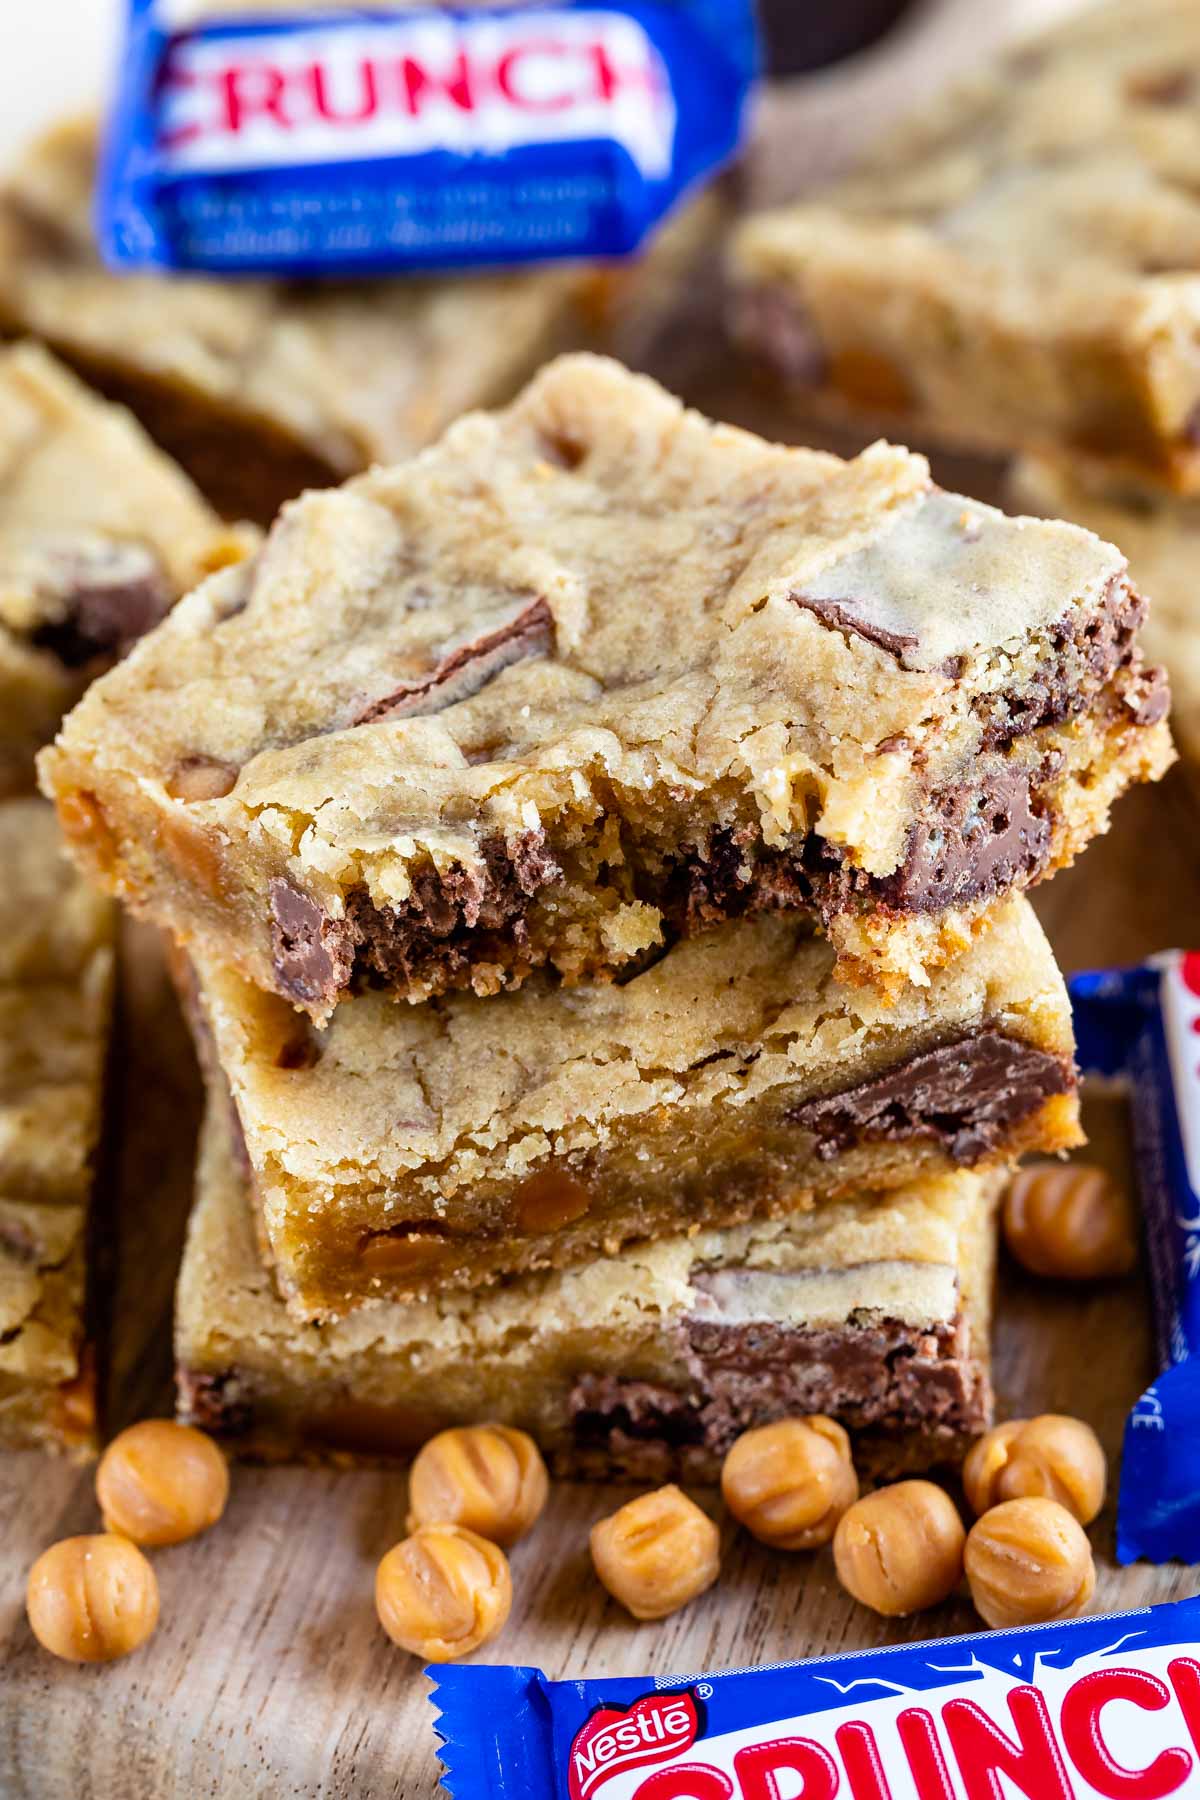 Stack of caramel crunch blondies with top blondie missing a bite and crunch candy bars next to it